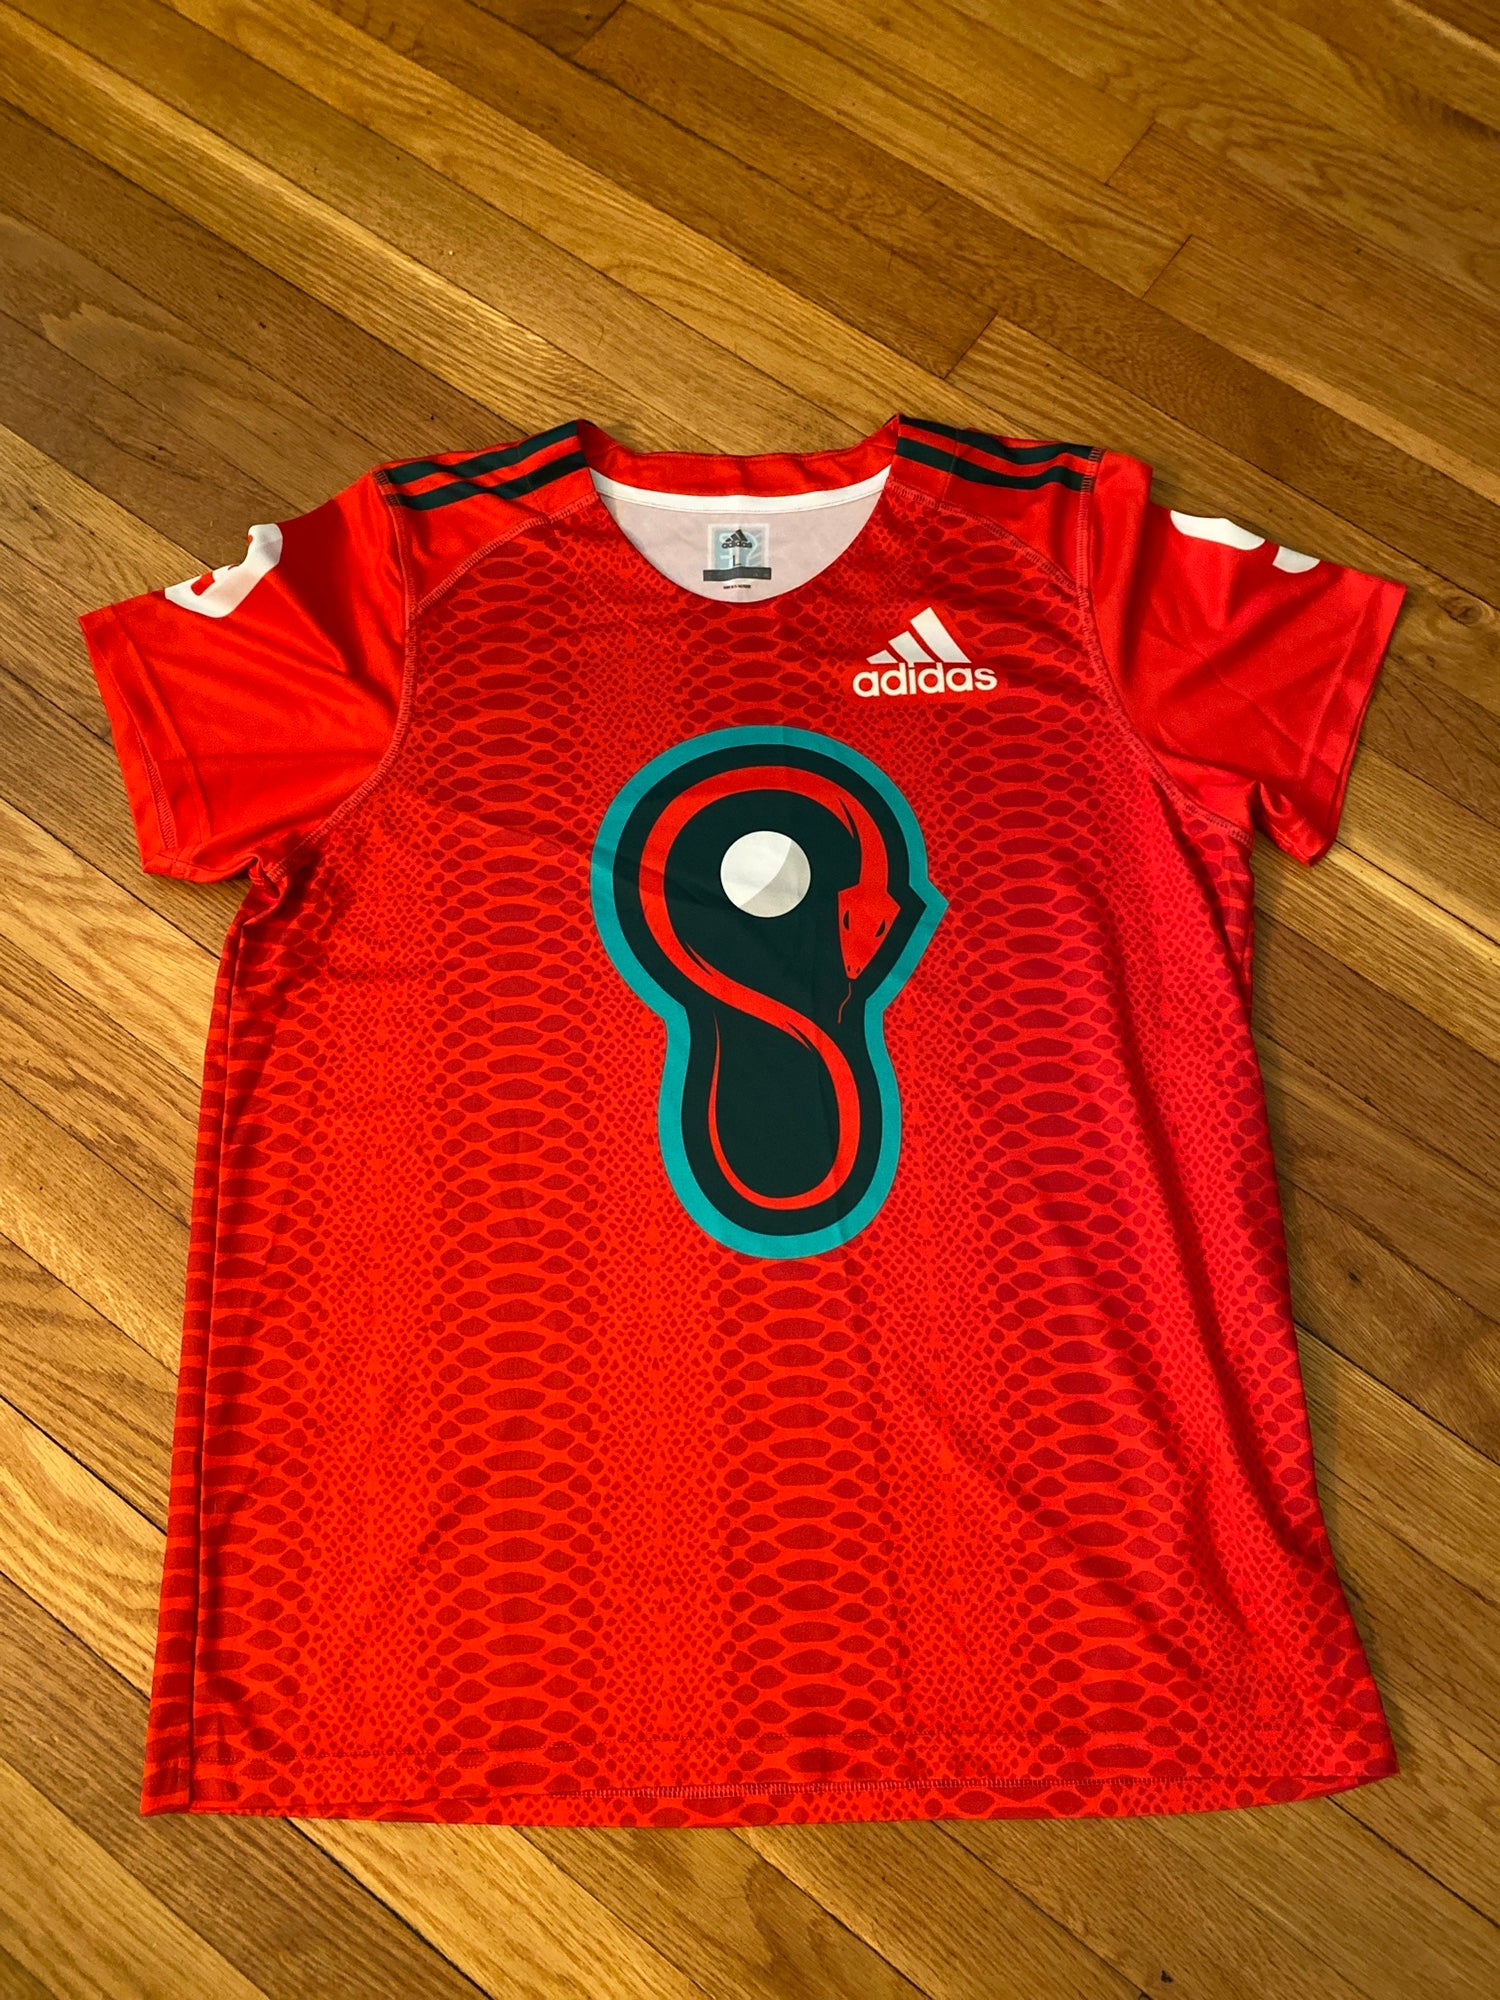 pll whipsnakes jersey